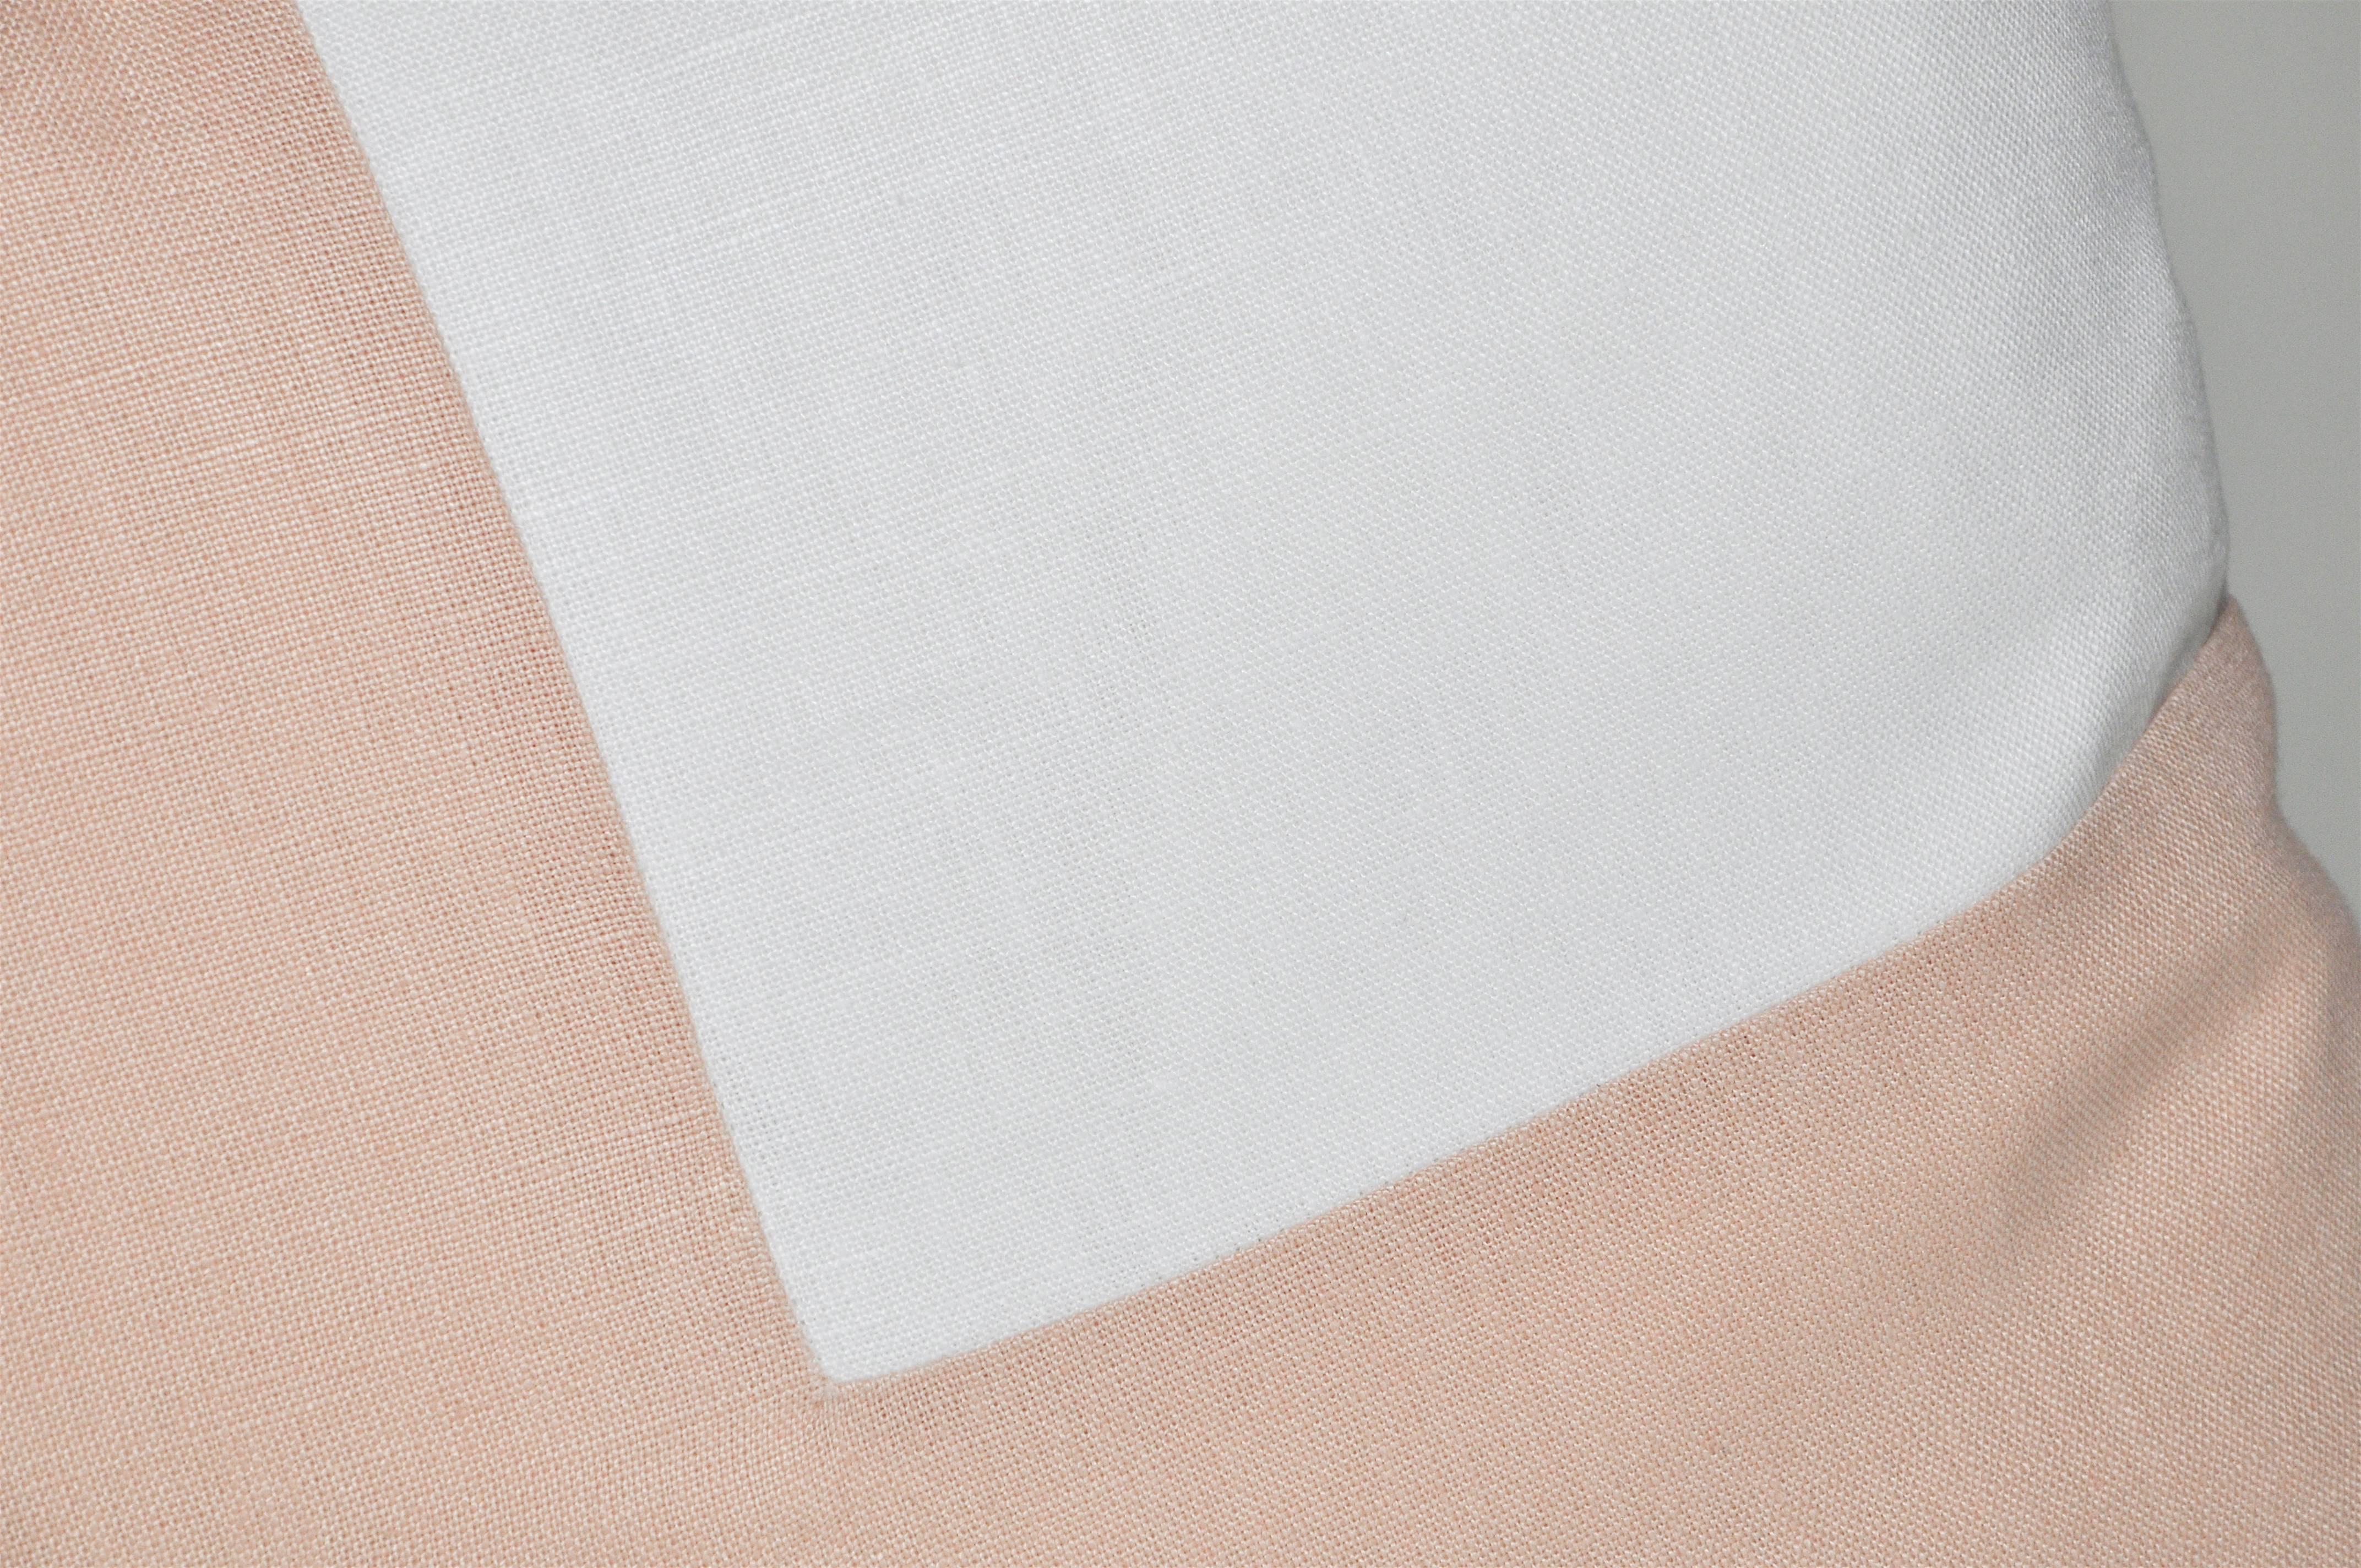 
A custom-made contemporary luxury cushion (pillow) constructed with vintage elements by using fragments of precious fabric. In a soft peachy nude light pink matched with classic pristine white from unused rolls both the colour and texture is